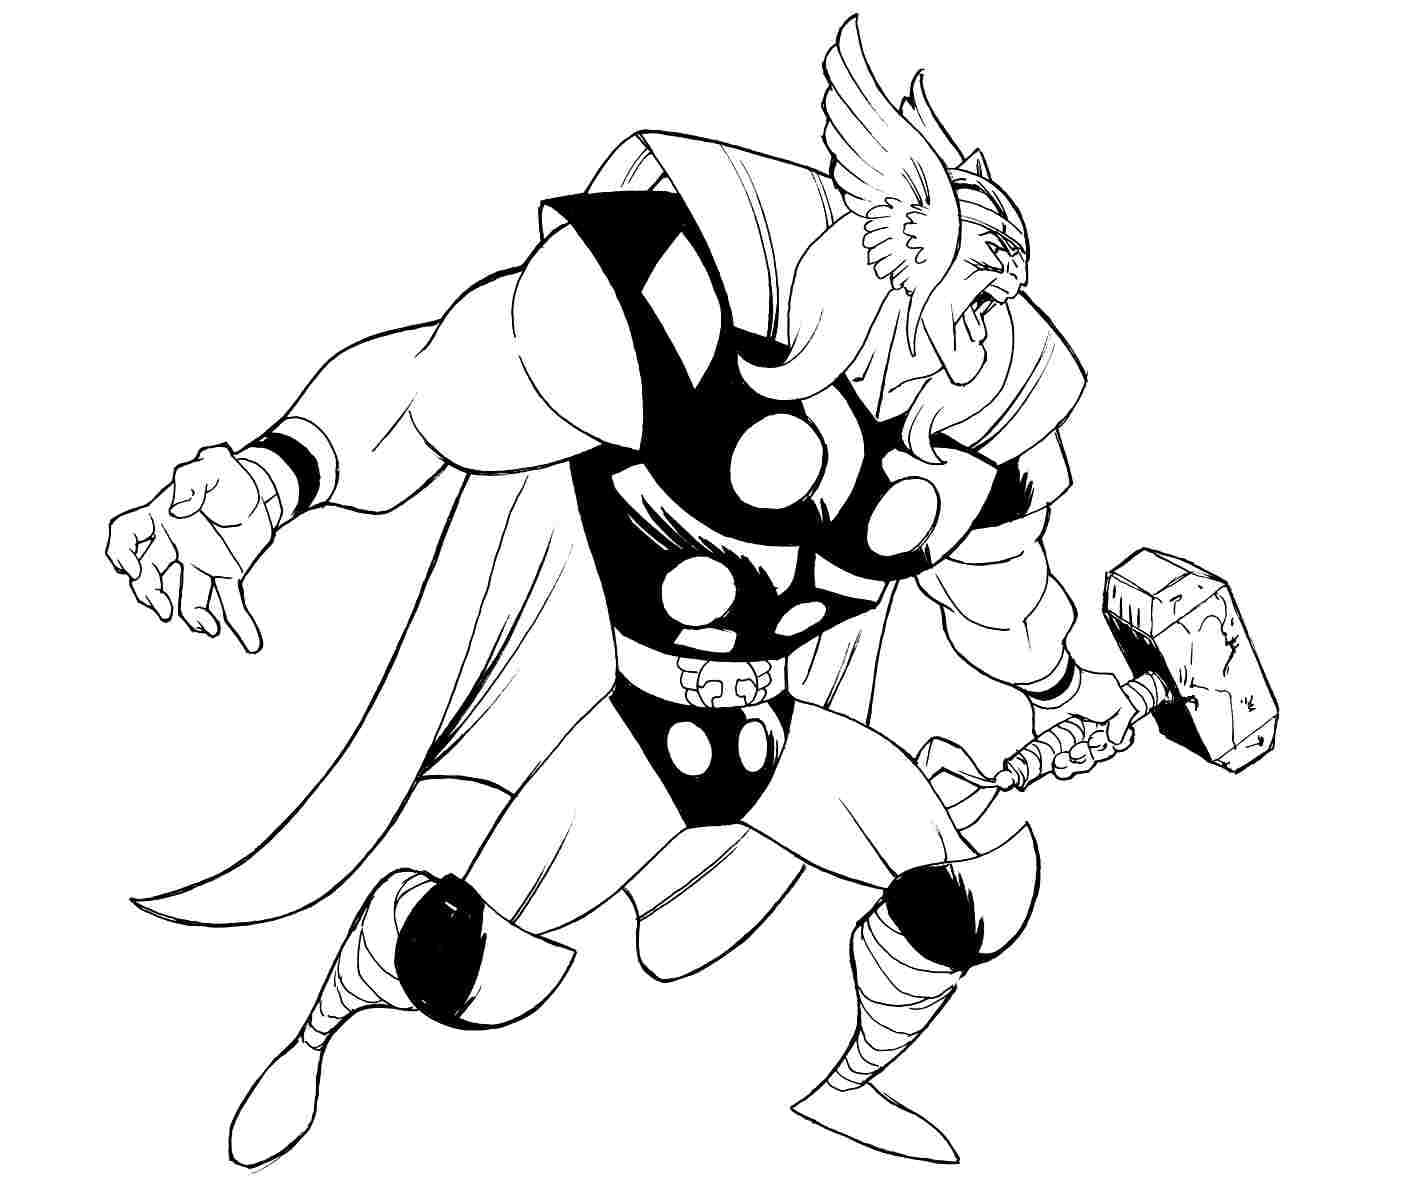 Snappy chibi thor coloring page